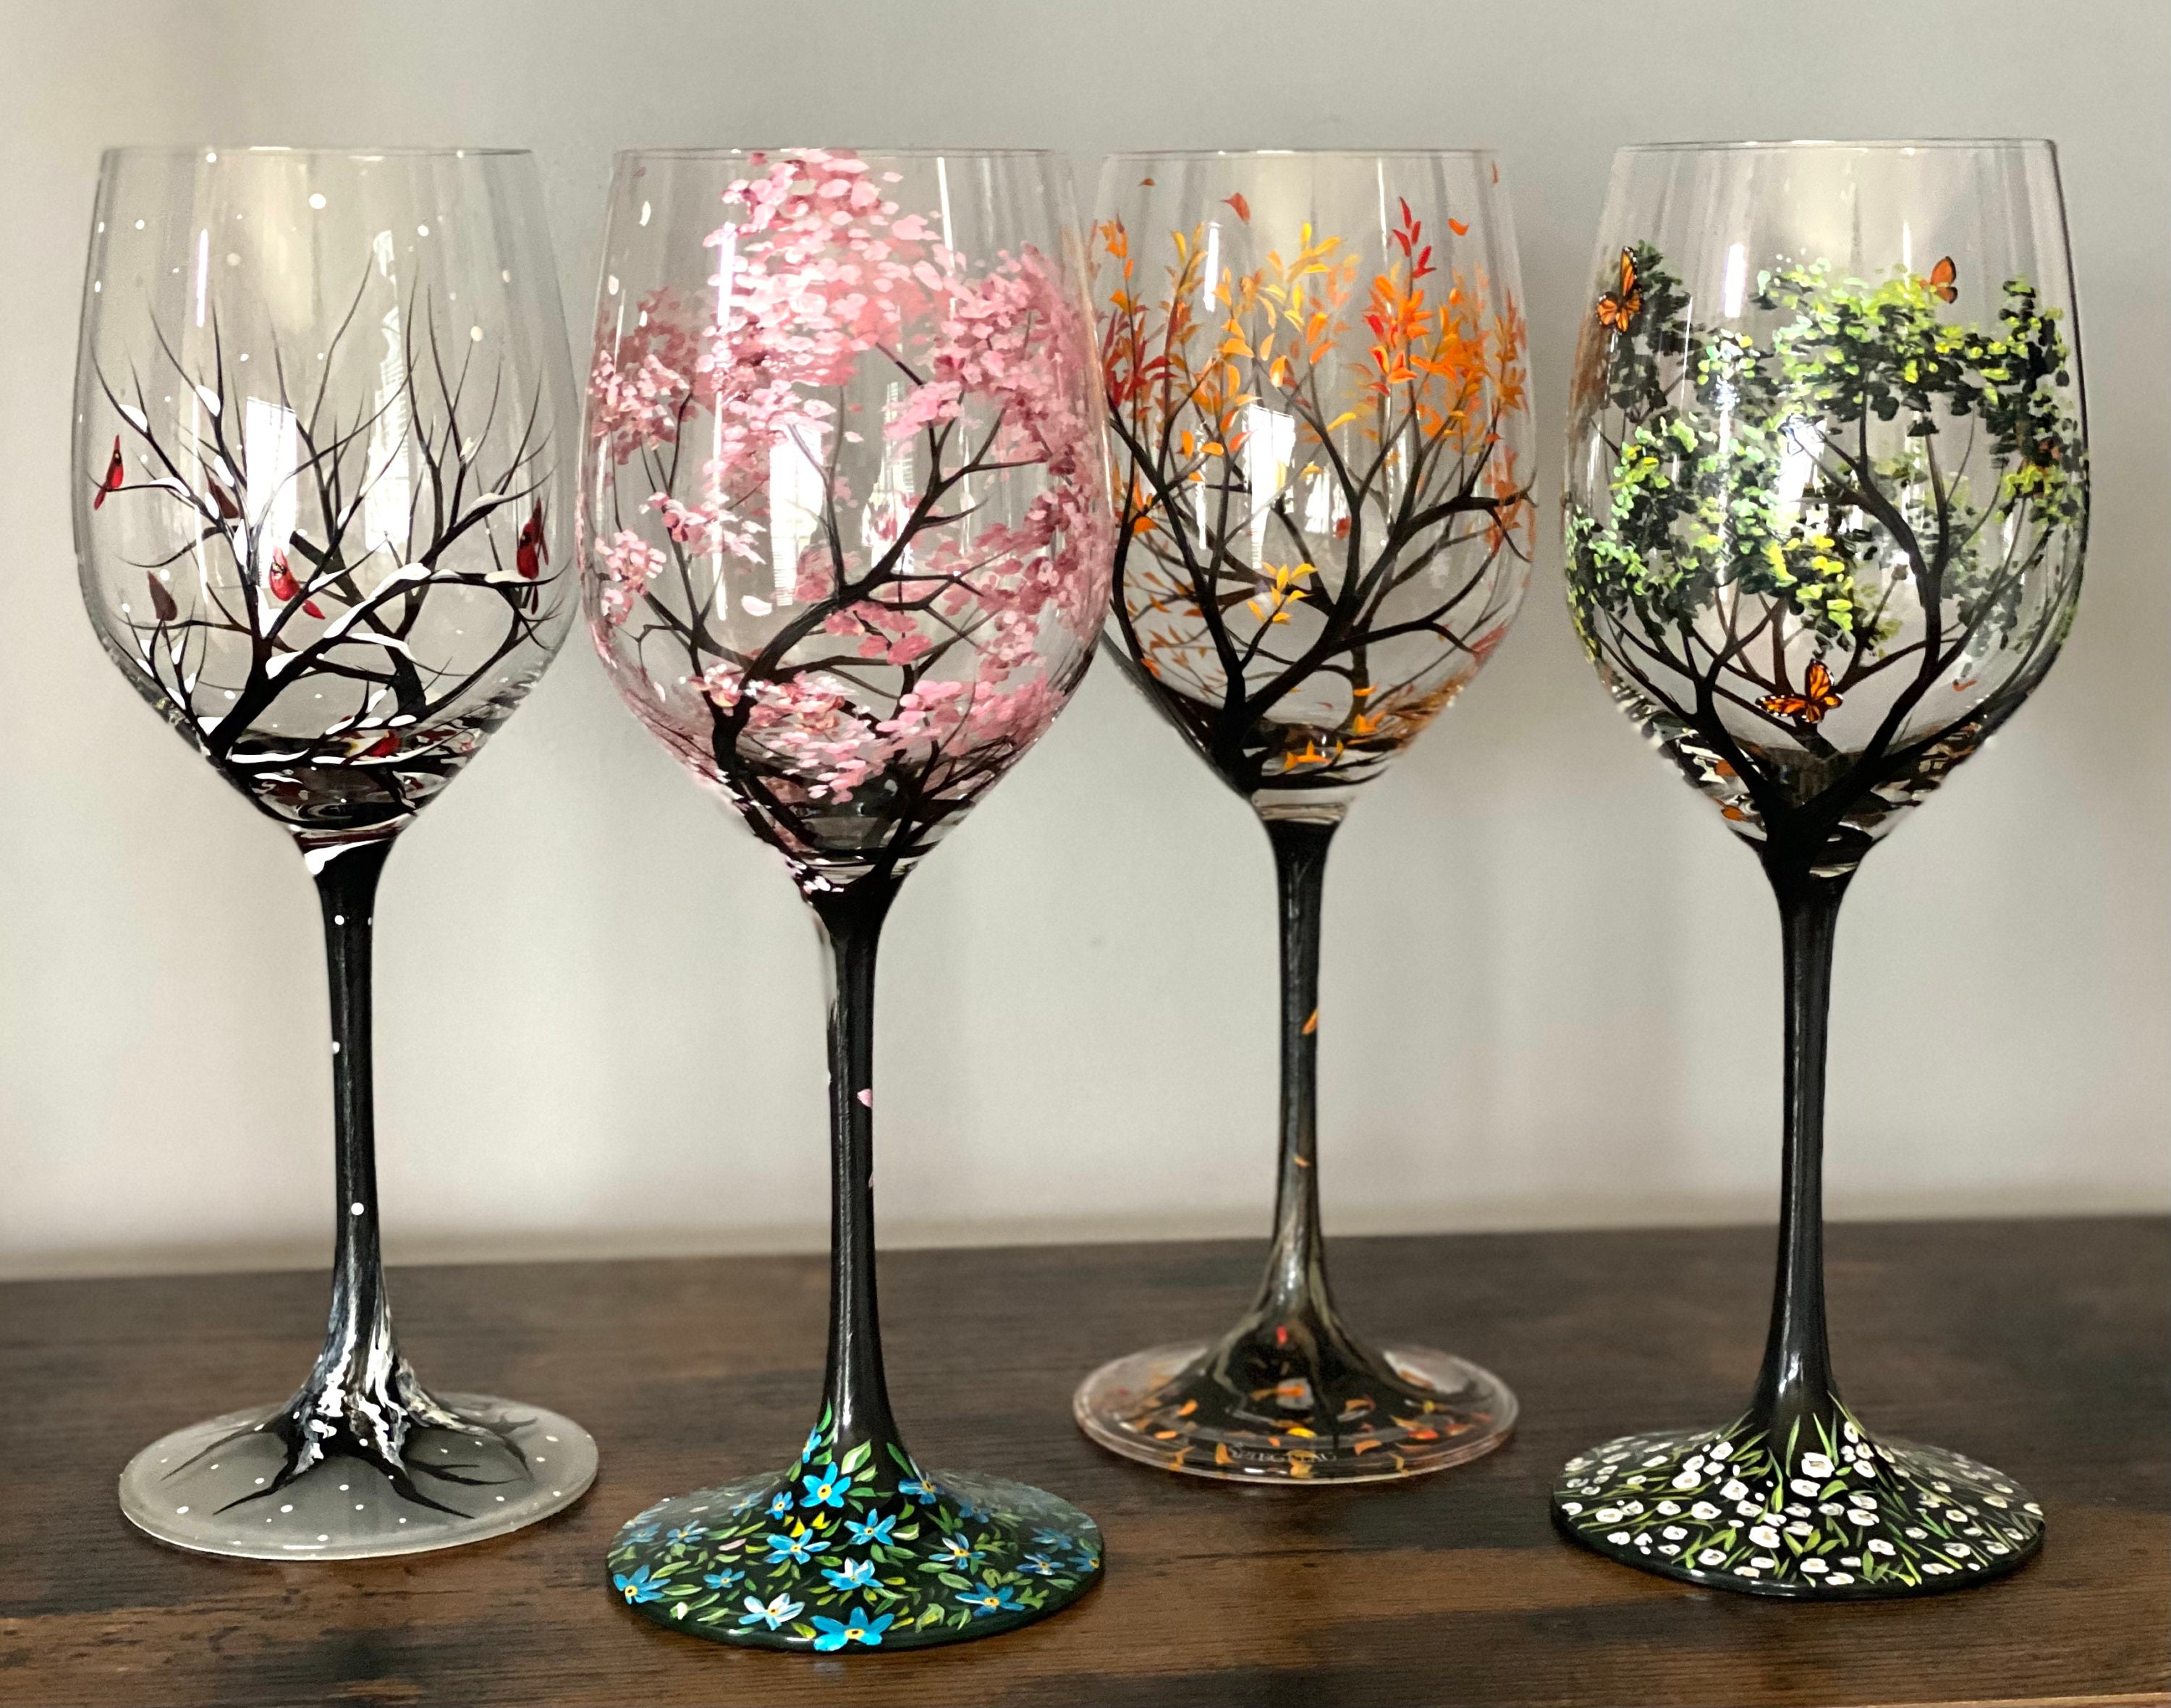 Fireworks Outdoor Acrylic Wine Glasses - Set of 4